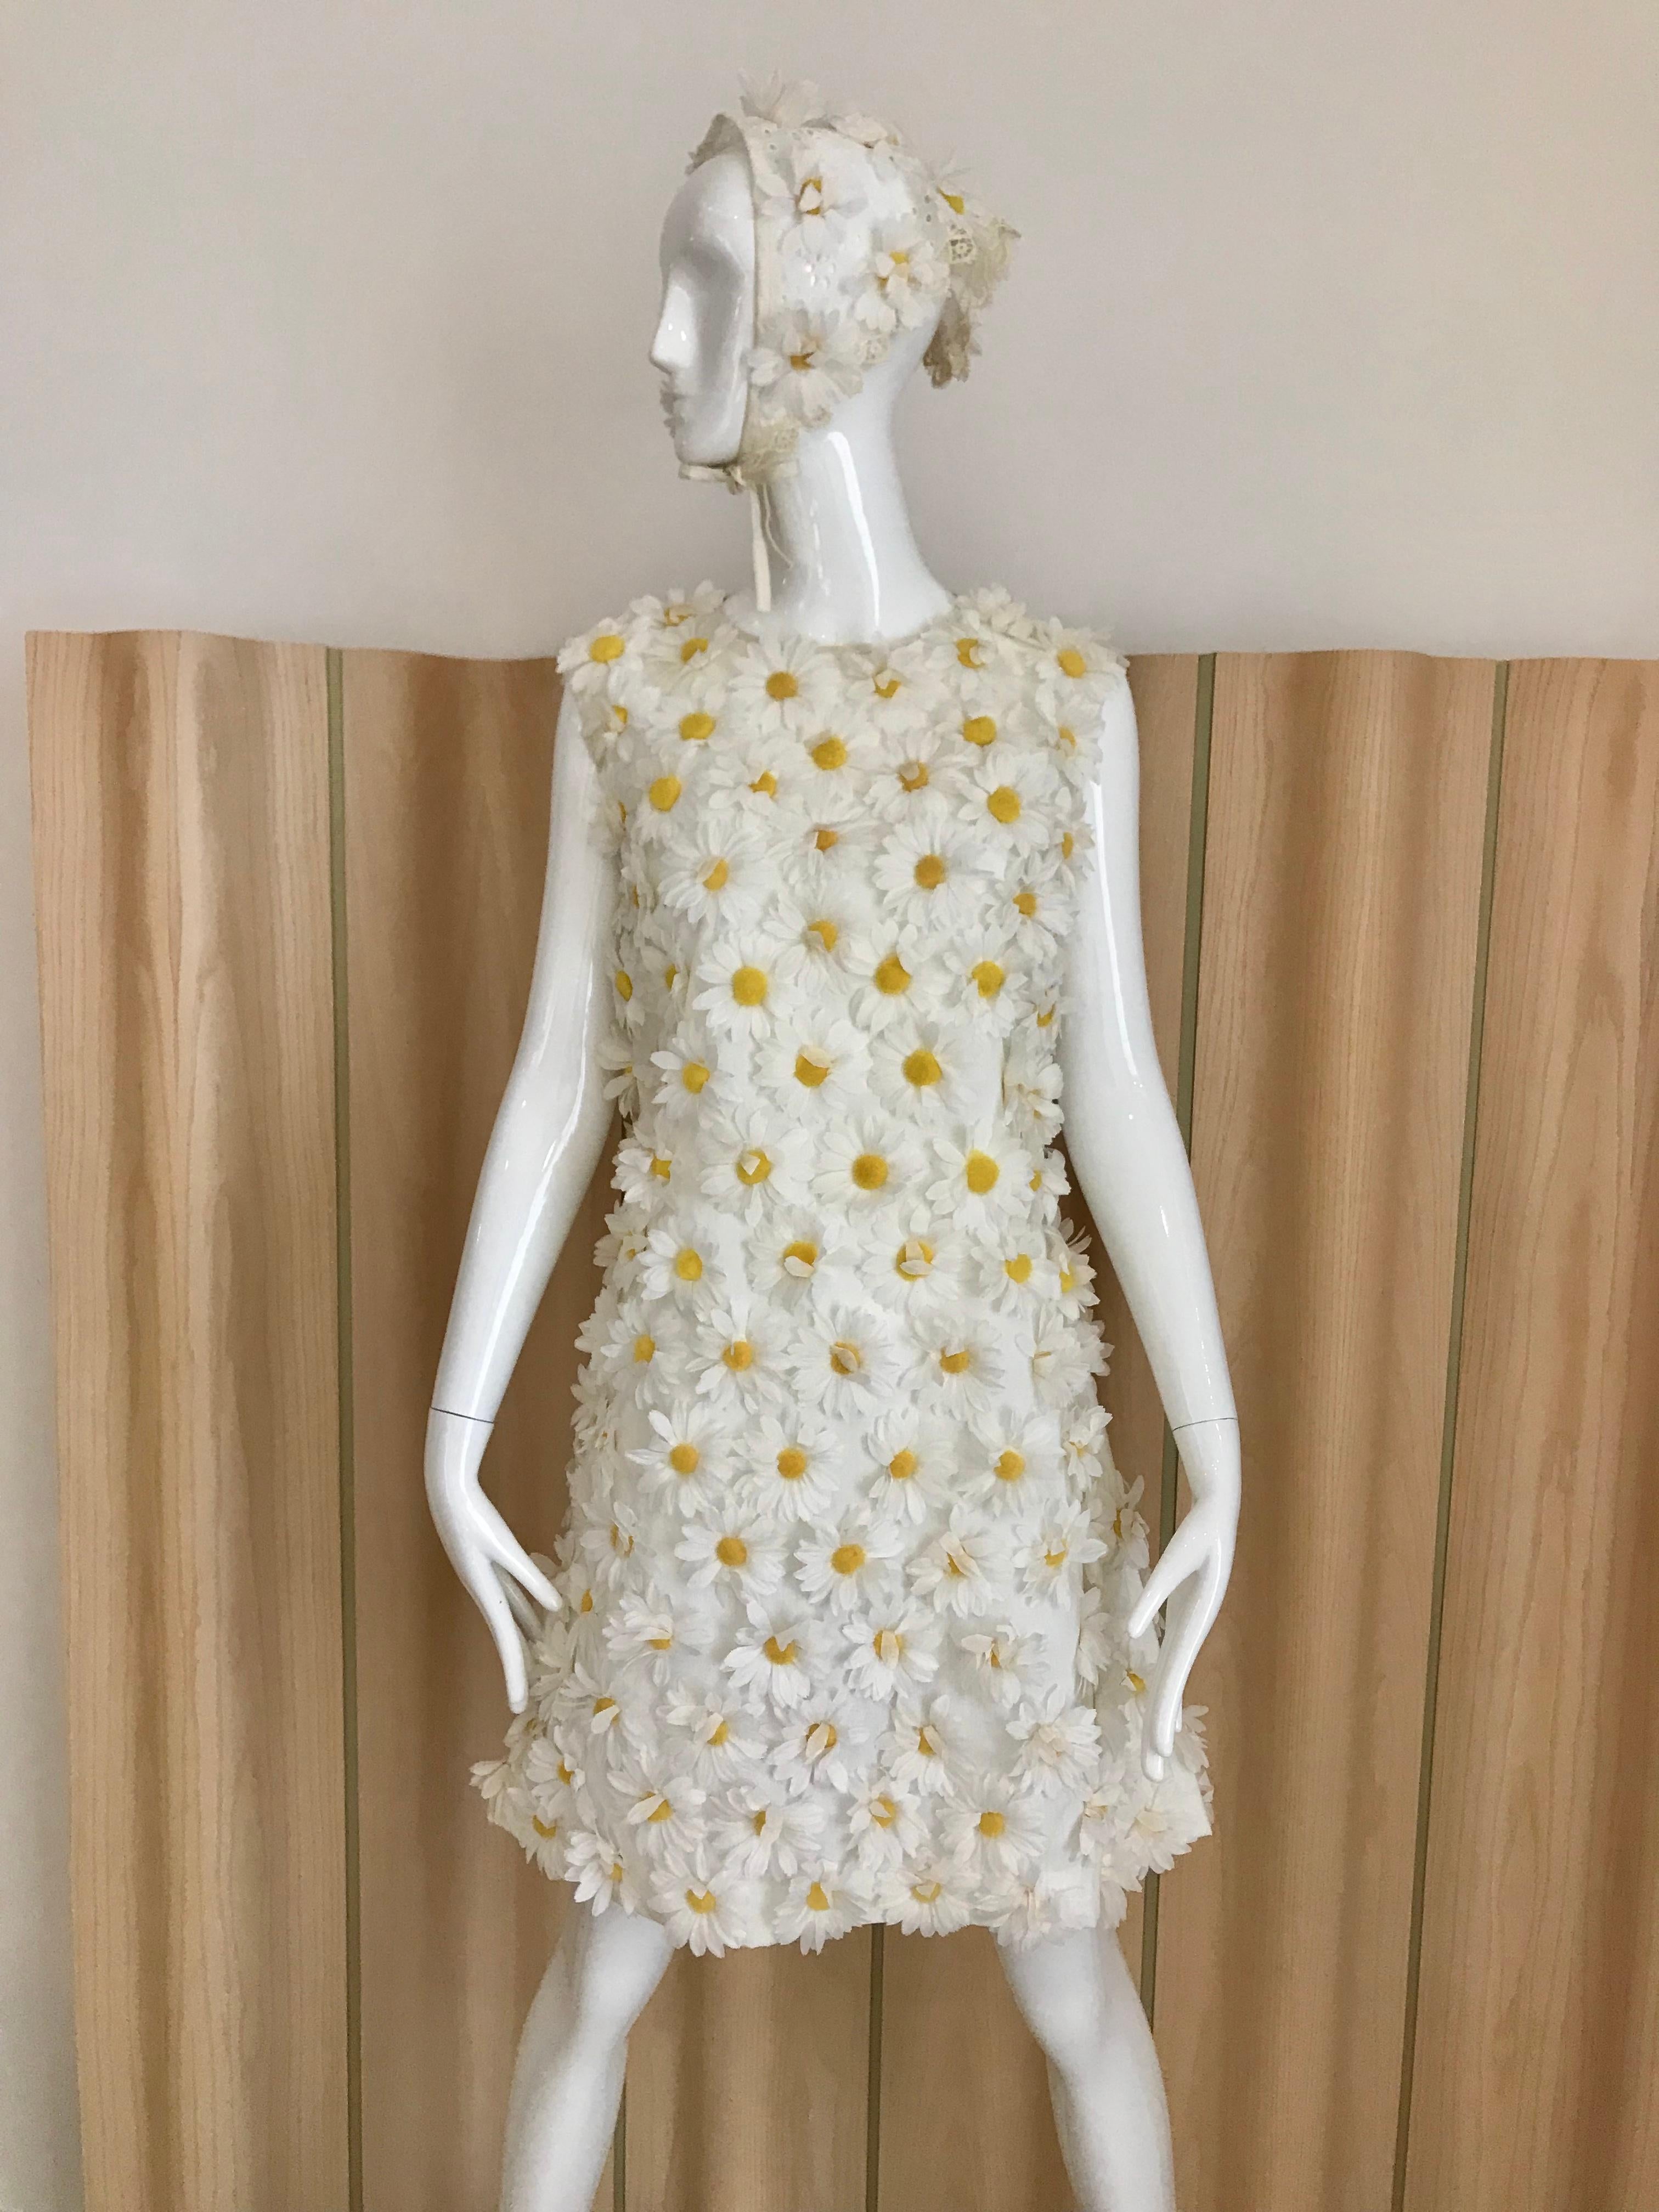 1960 White Sleeveless Cotton Shift dress with daisy appliqué. Dress comes with head scarf.
Size: Medium
Bust: 38 inches/ Waist: 34 inches/ Hip: 40 inches/Length: 34 inches
**see stains ( image attached#7 and #8)